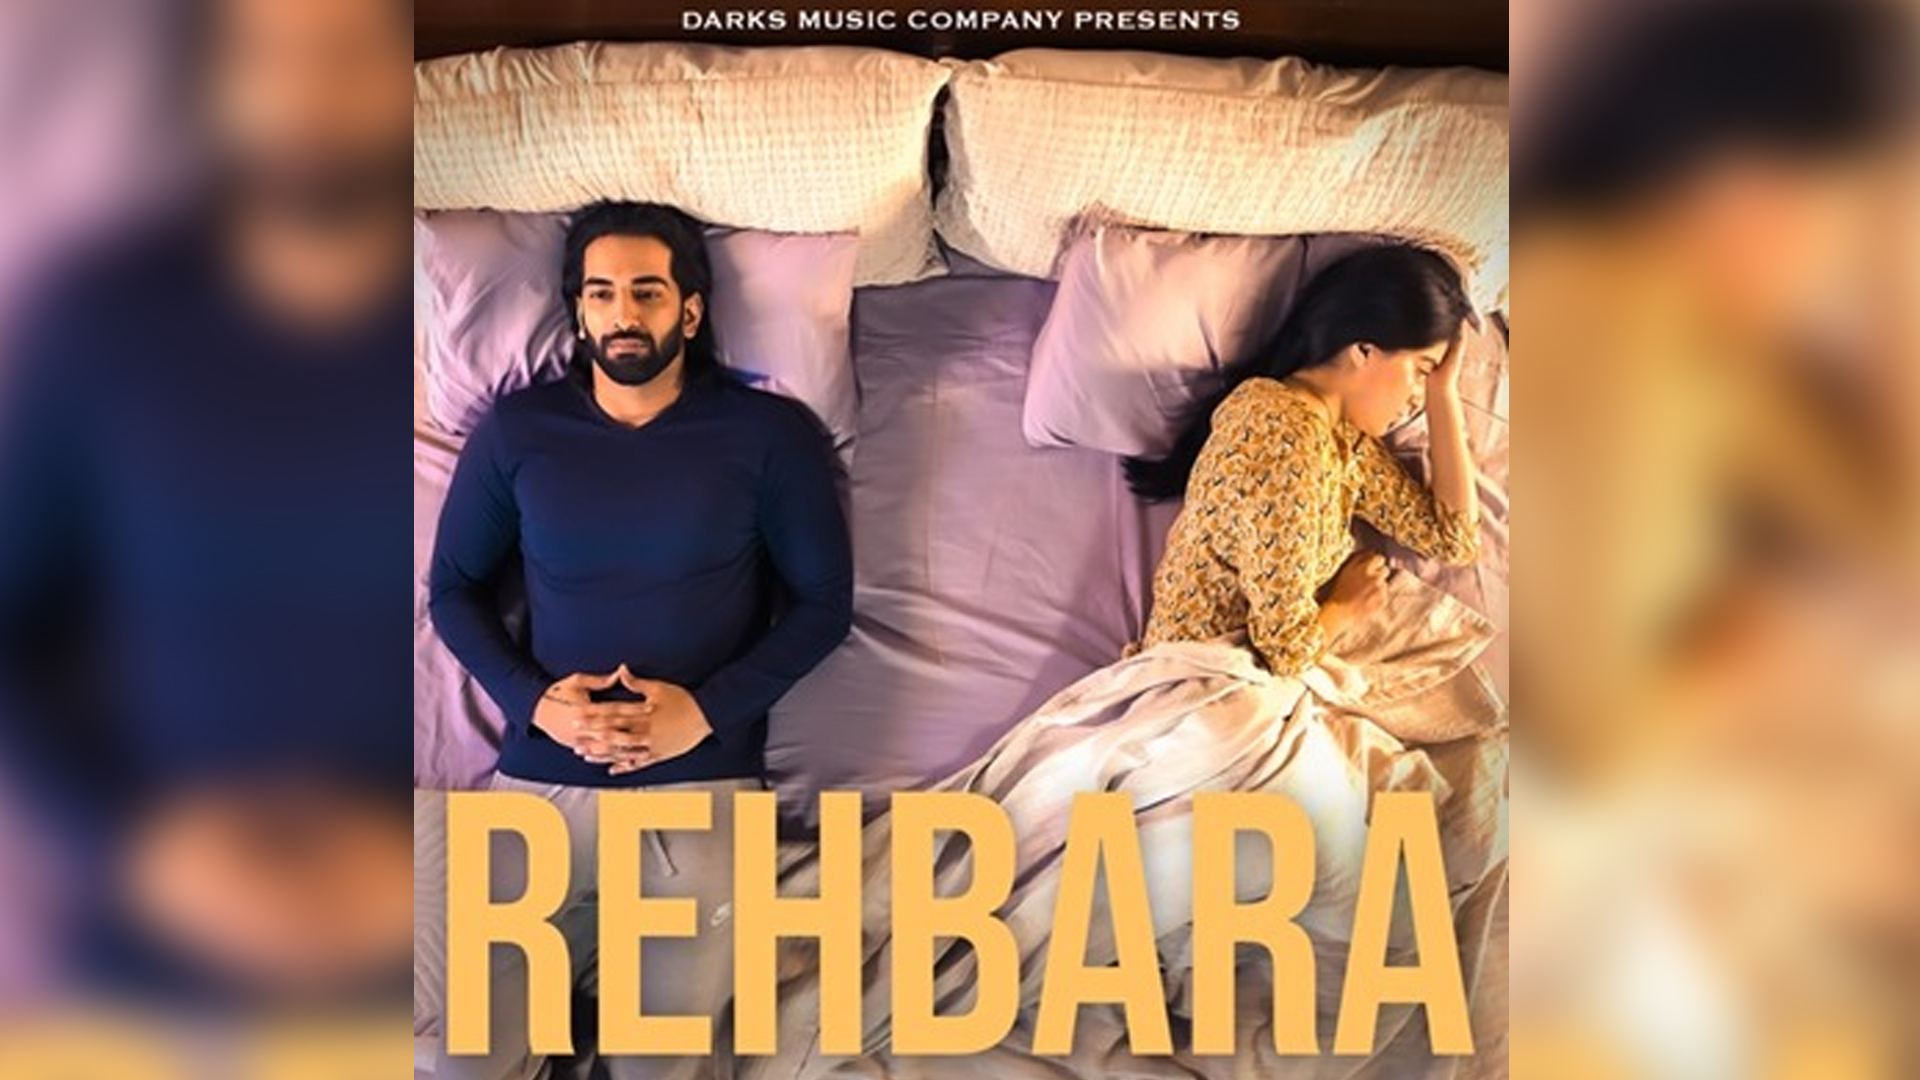 Vilen, In his distinctive style releases “Rehbara”, an empowering song that inspires resilience and love